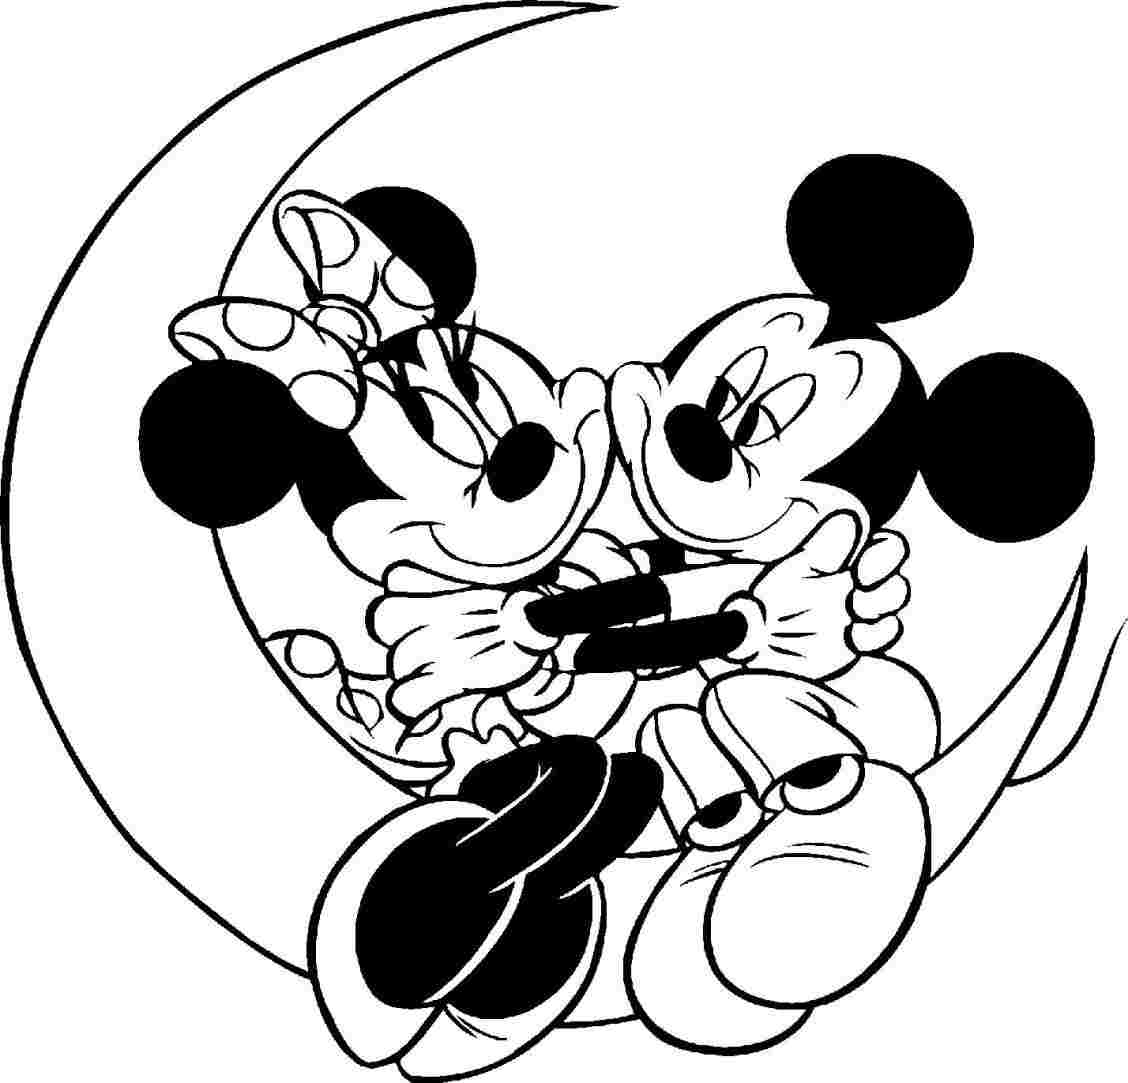 Minnie Mouse Pencil Drawing | Free download on ClipArtMag